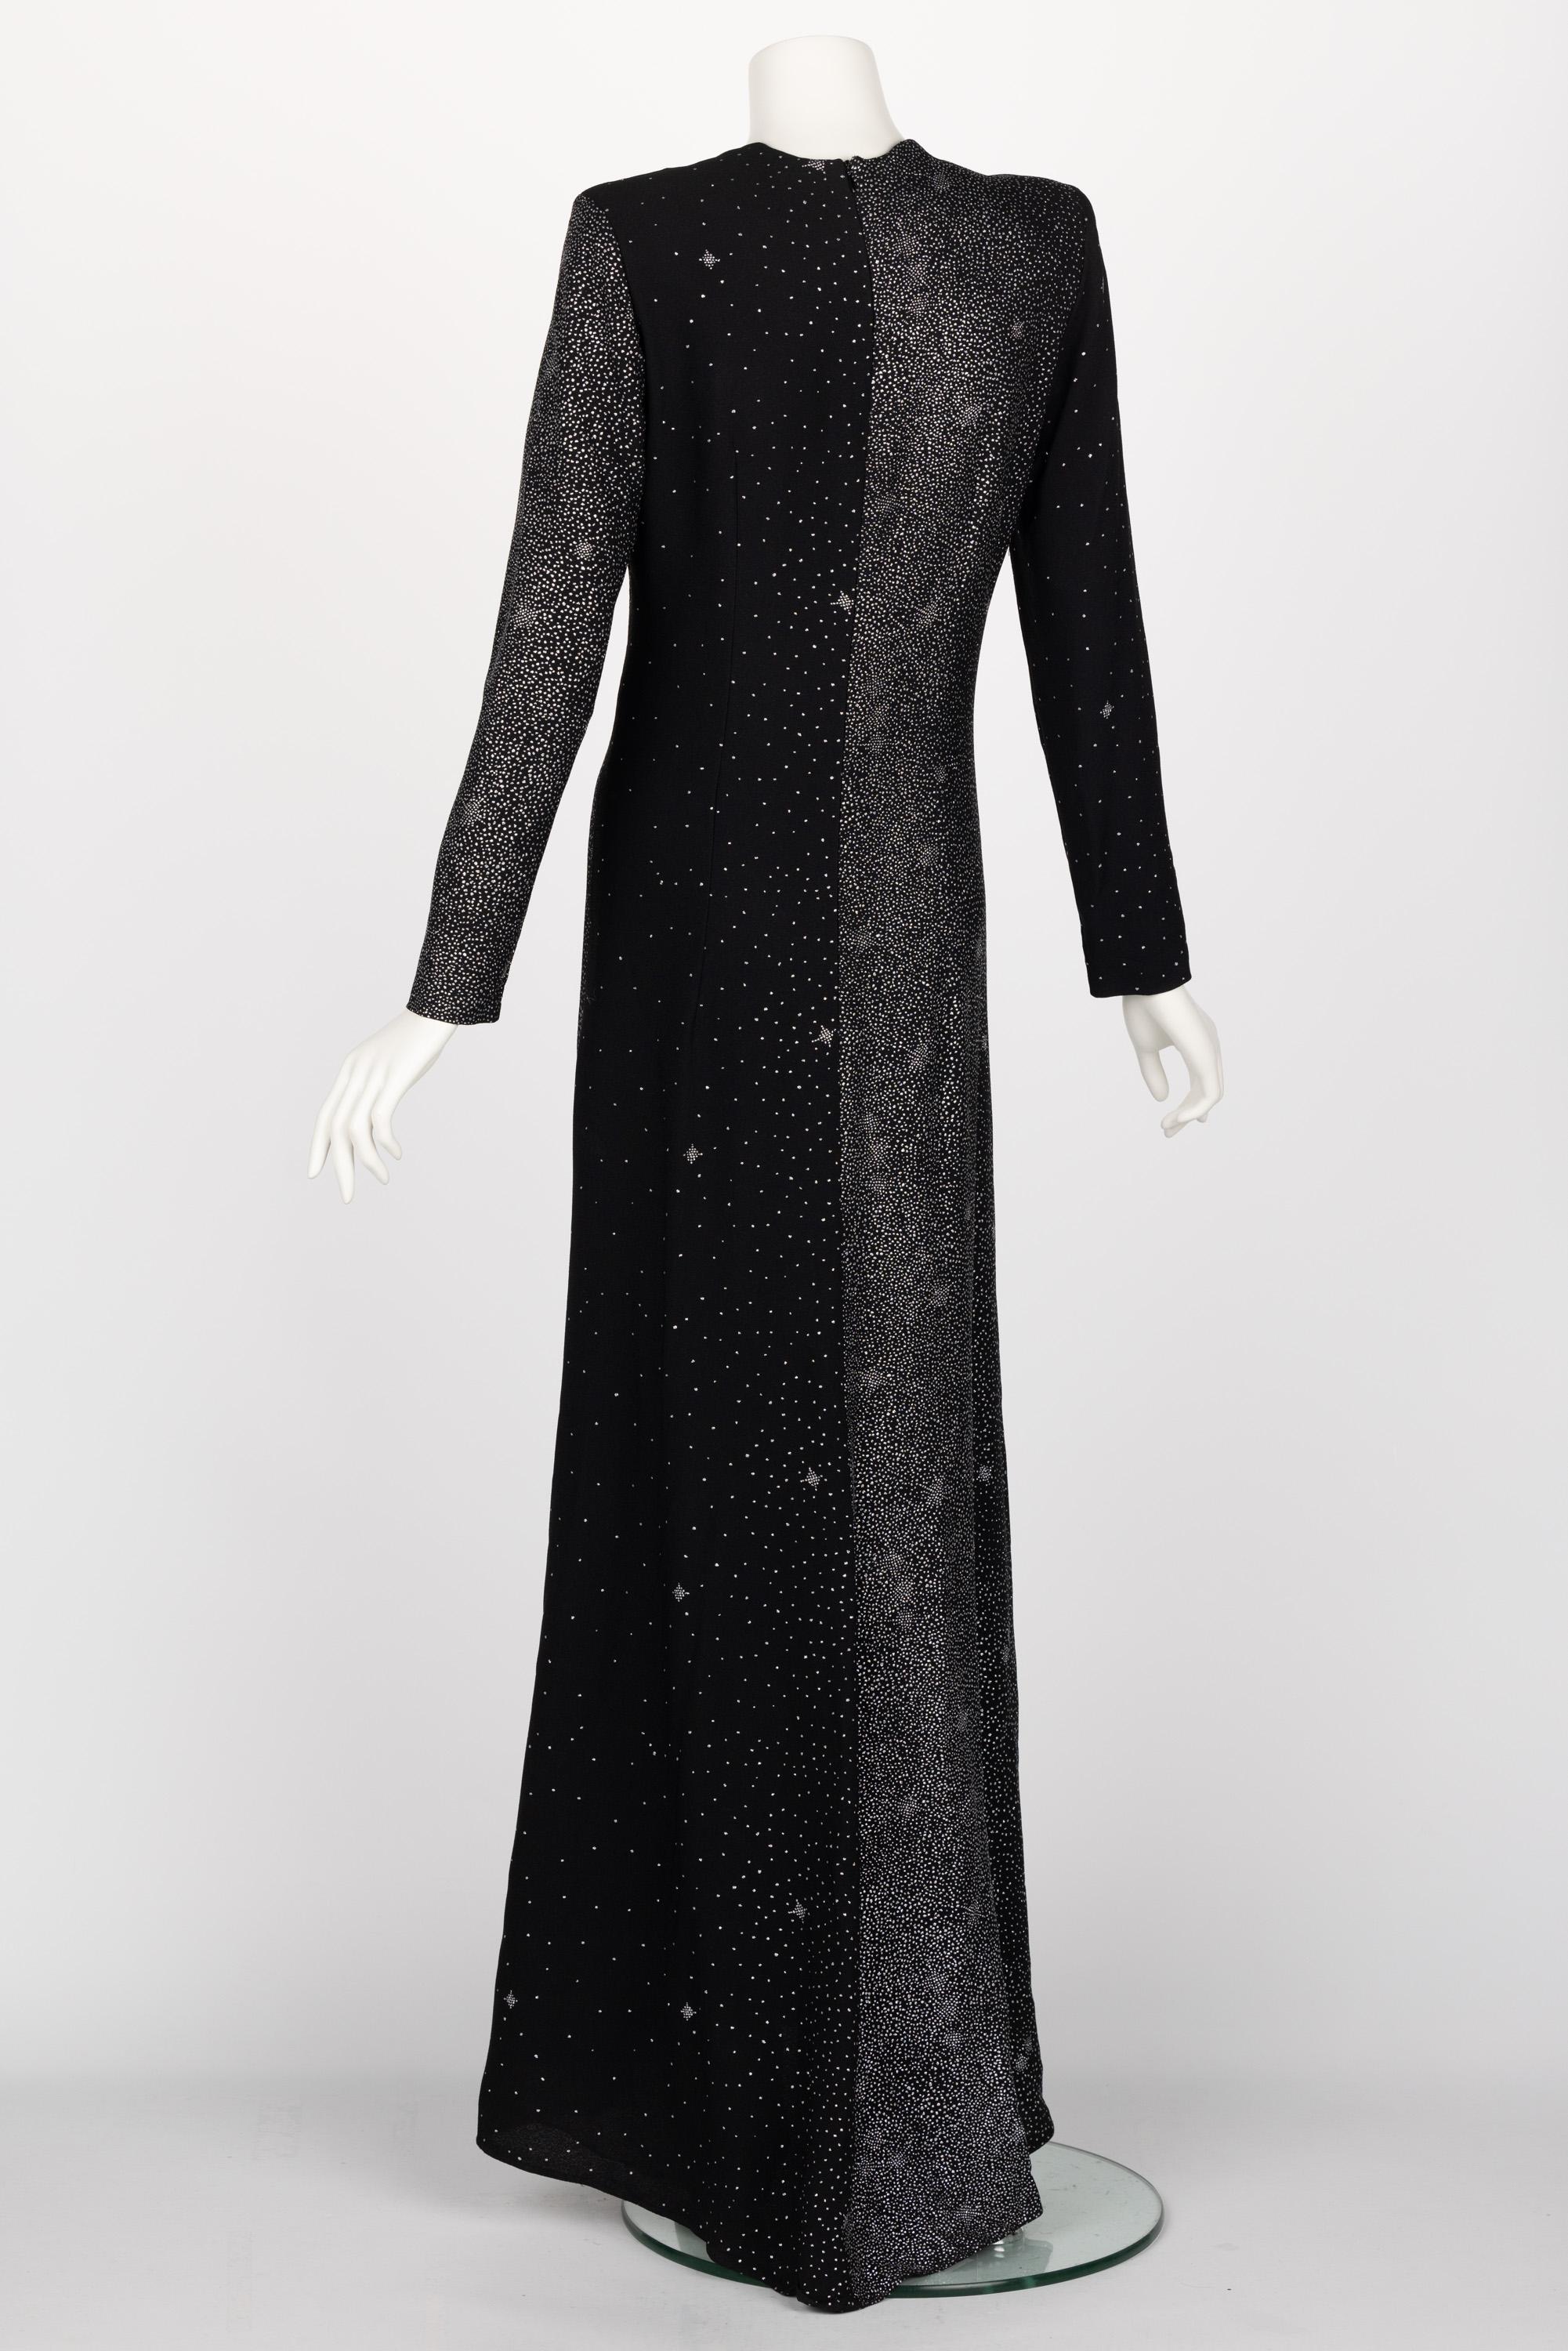 Christian Lacroix Midnight Sparkle Runway Gown FW 98/99 For Sale 3